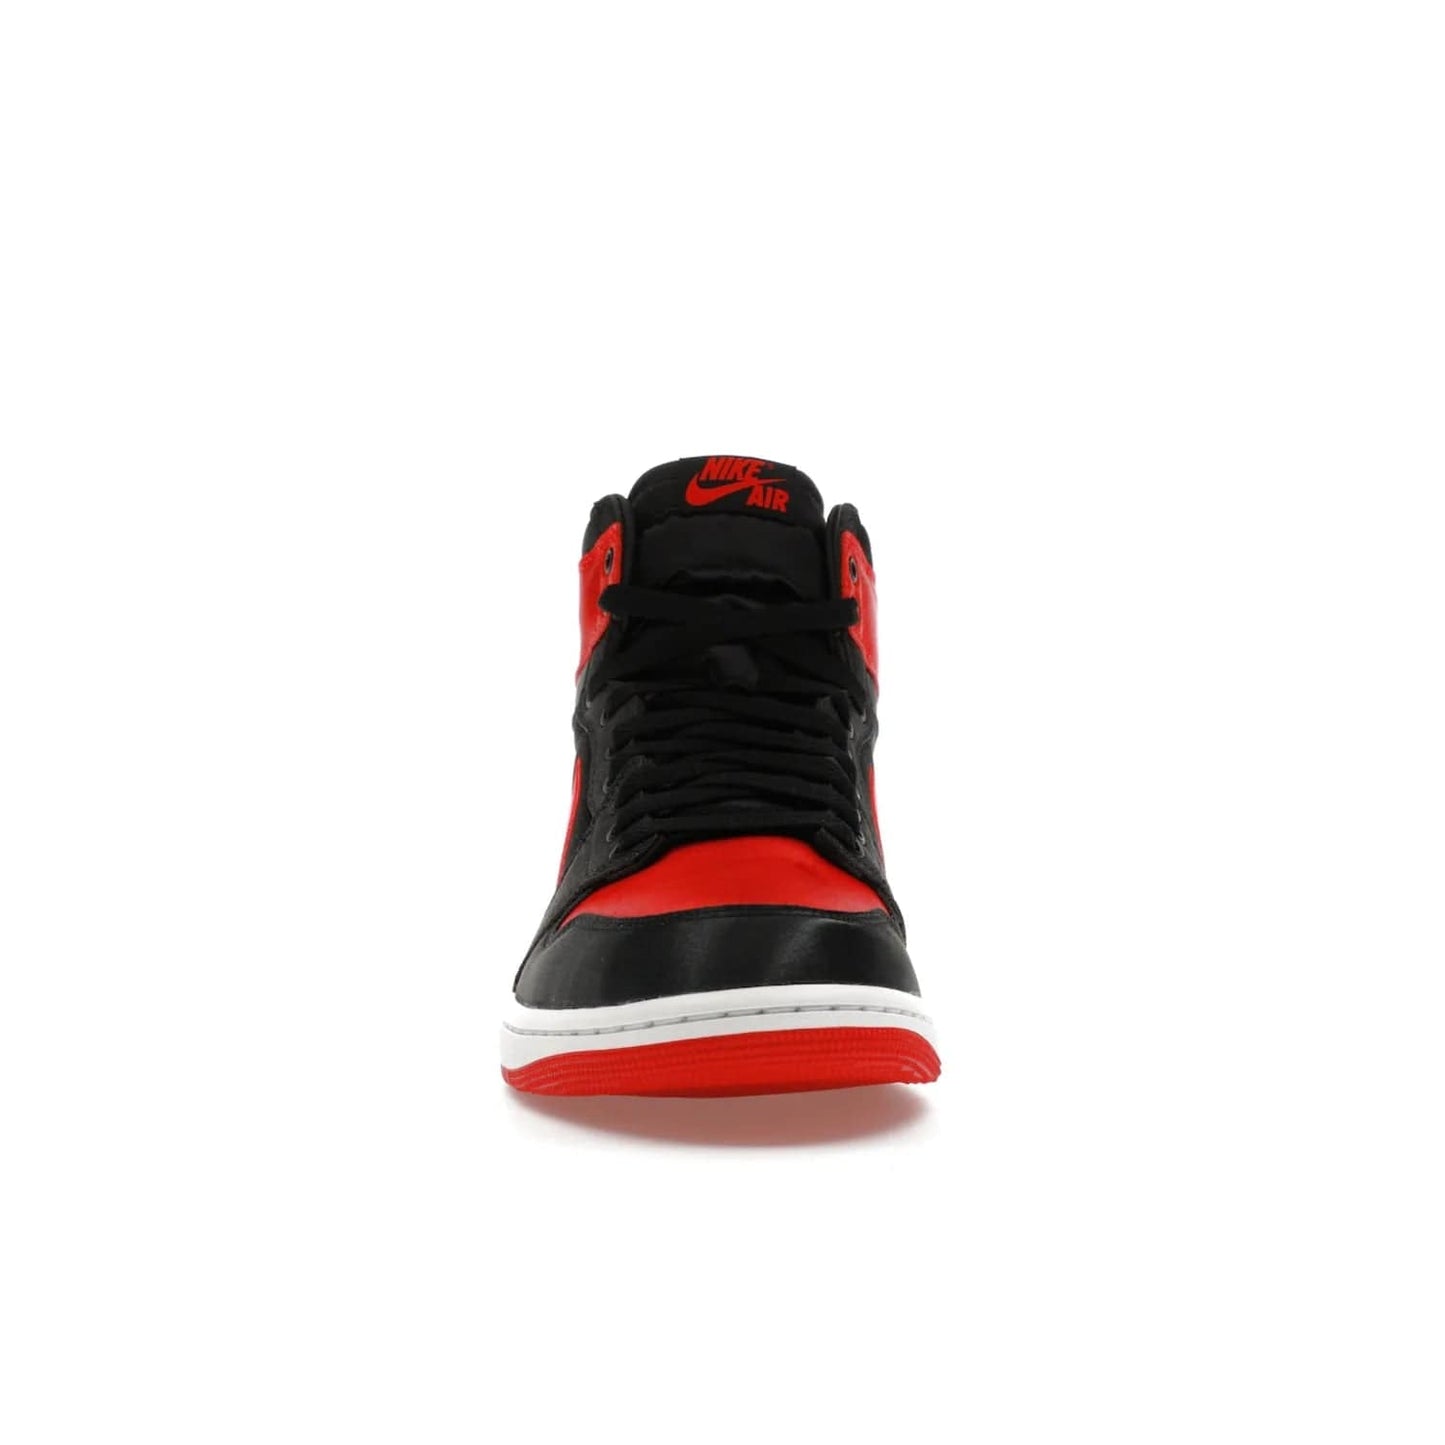 Jordan 1 Retro High OG Satin Bred (Women's) - Image 10 - Only at www.BallersClubKickz.com - Introducing the Jordan 1 Retro High OG Satin Bred (Women's). Luxe satin finish, contrasting hues & classic accents. Trending sneakers symbolizing timelessness & heritage. Make a bold statement with this iconic shoe. Available October 4, 2023.